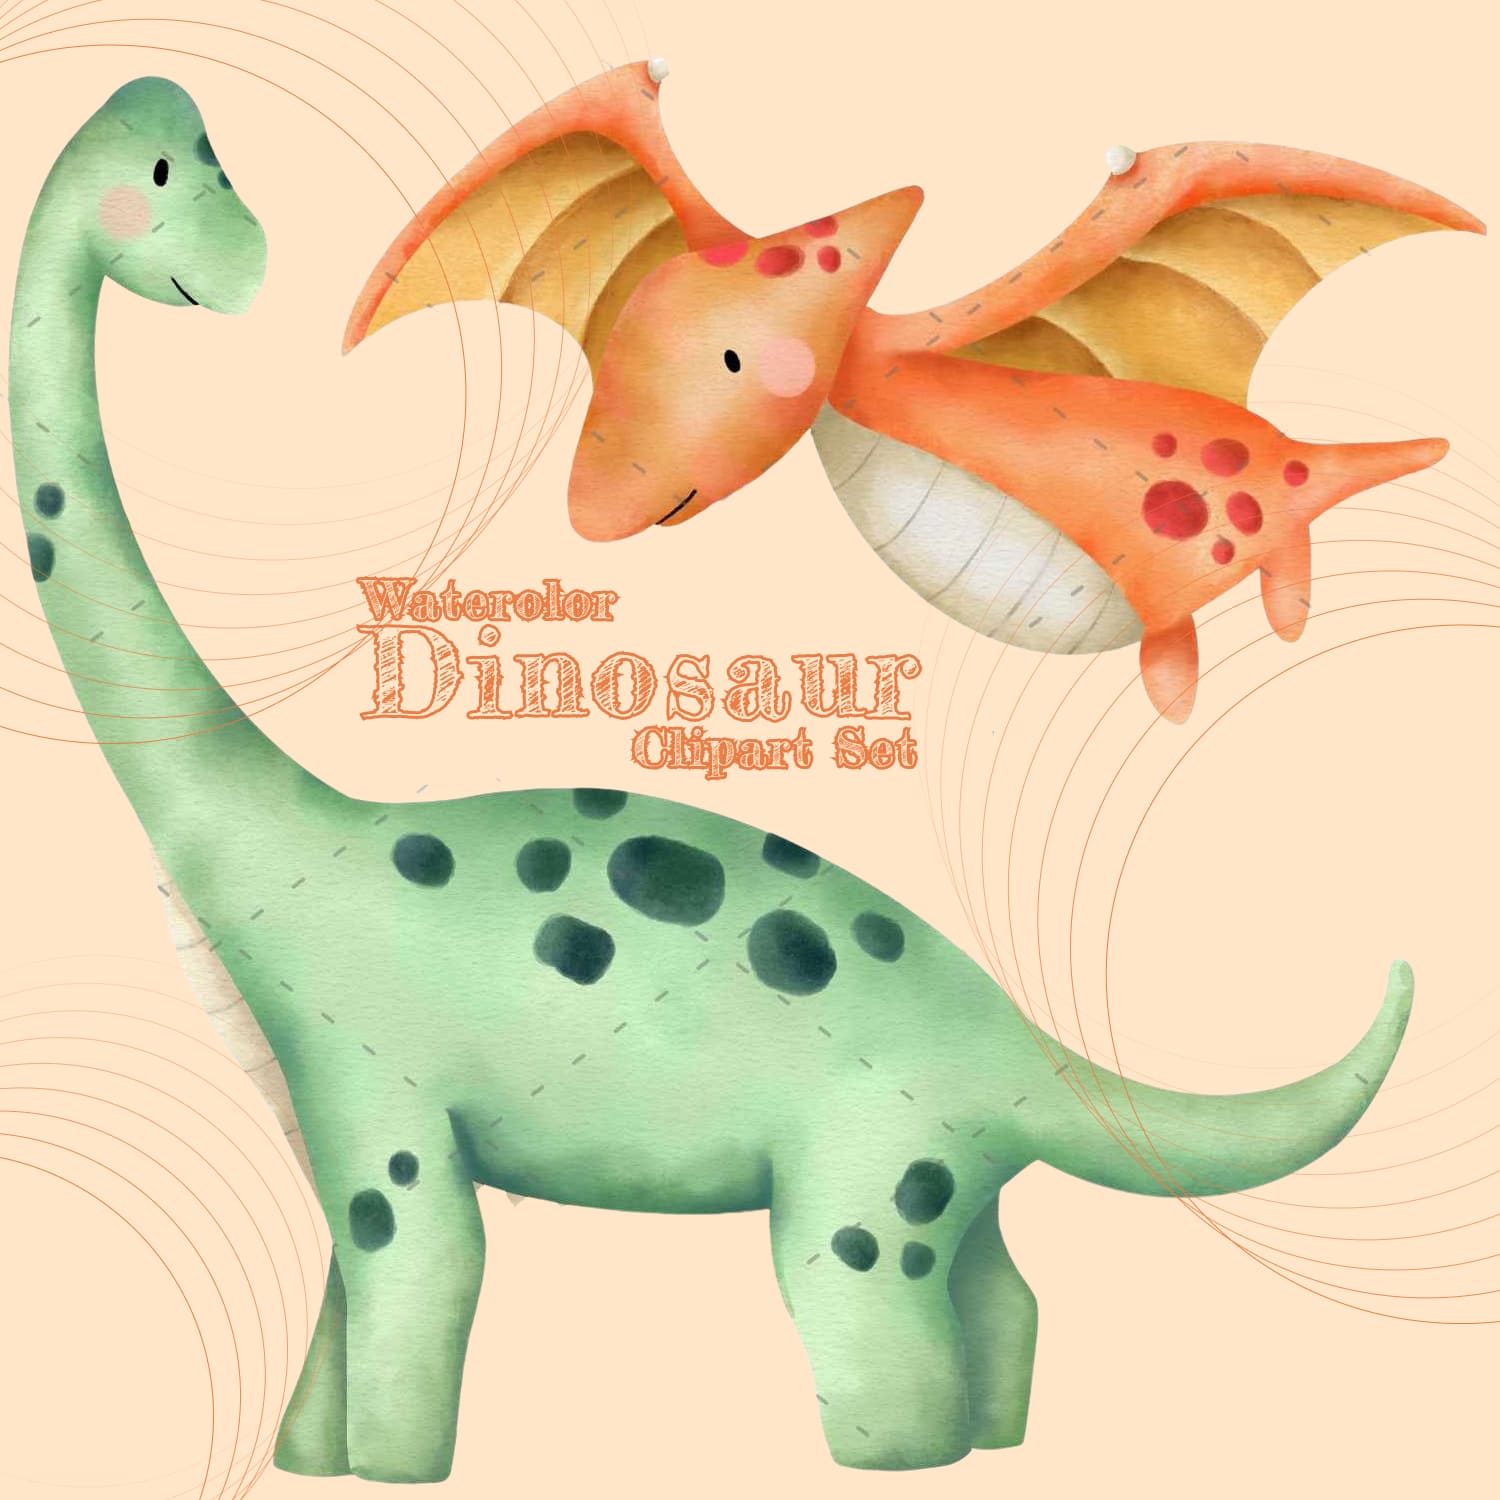 Waterolor Dinosaur Clipart Set cover image.